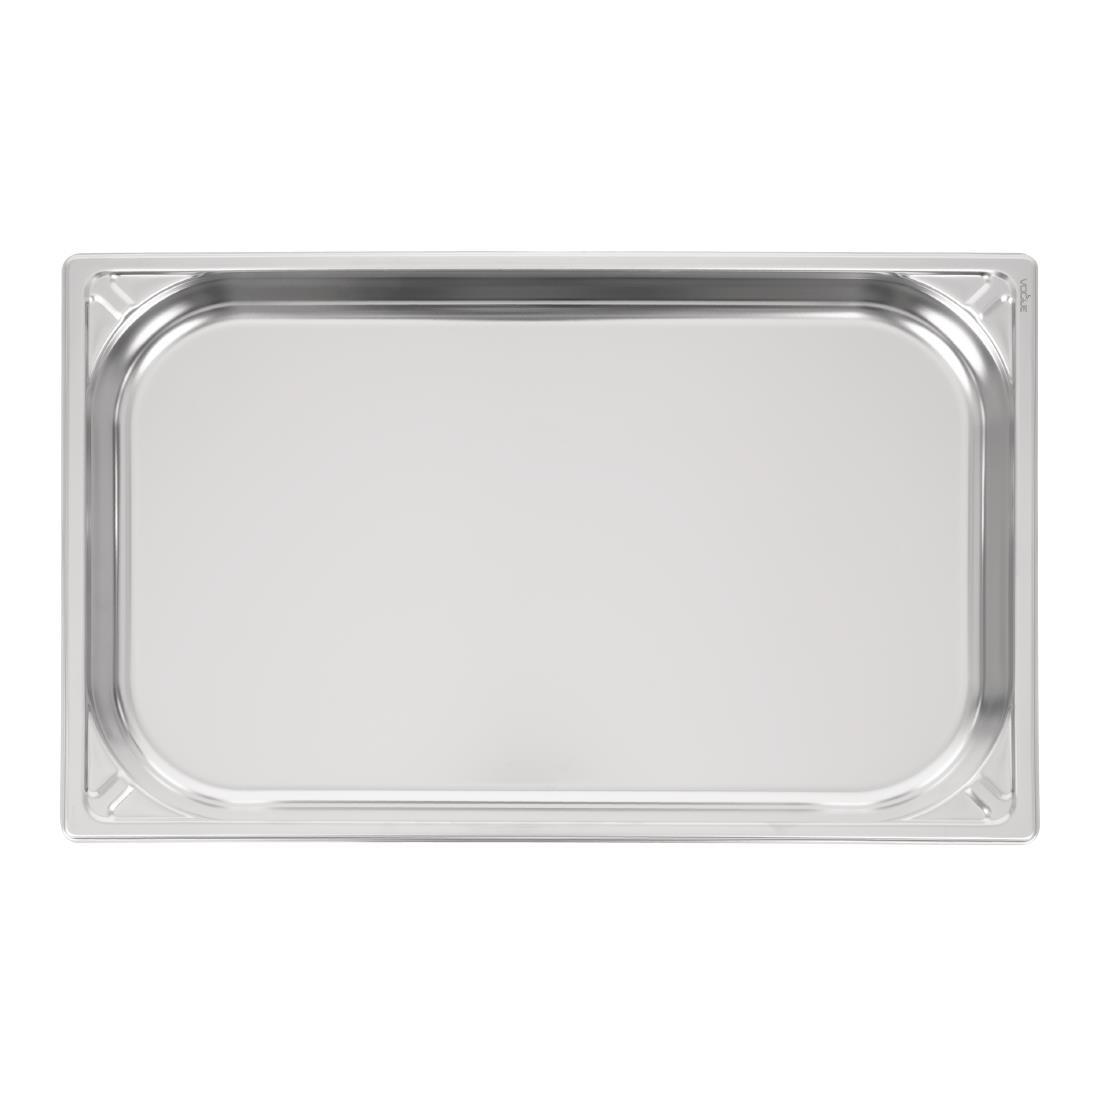 Vogue Heavy Duty Stainless Steel 1/1 Gastronorm Pan 40mm - DW432  - 4